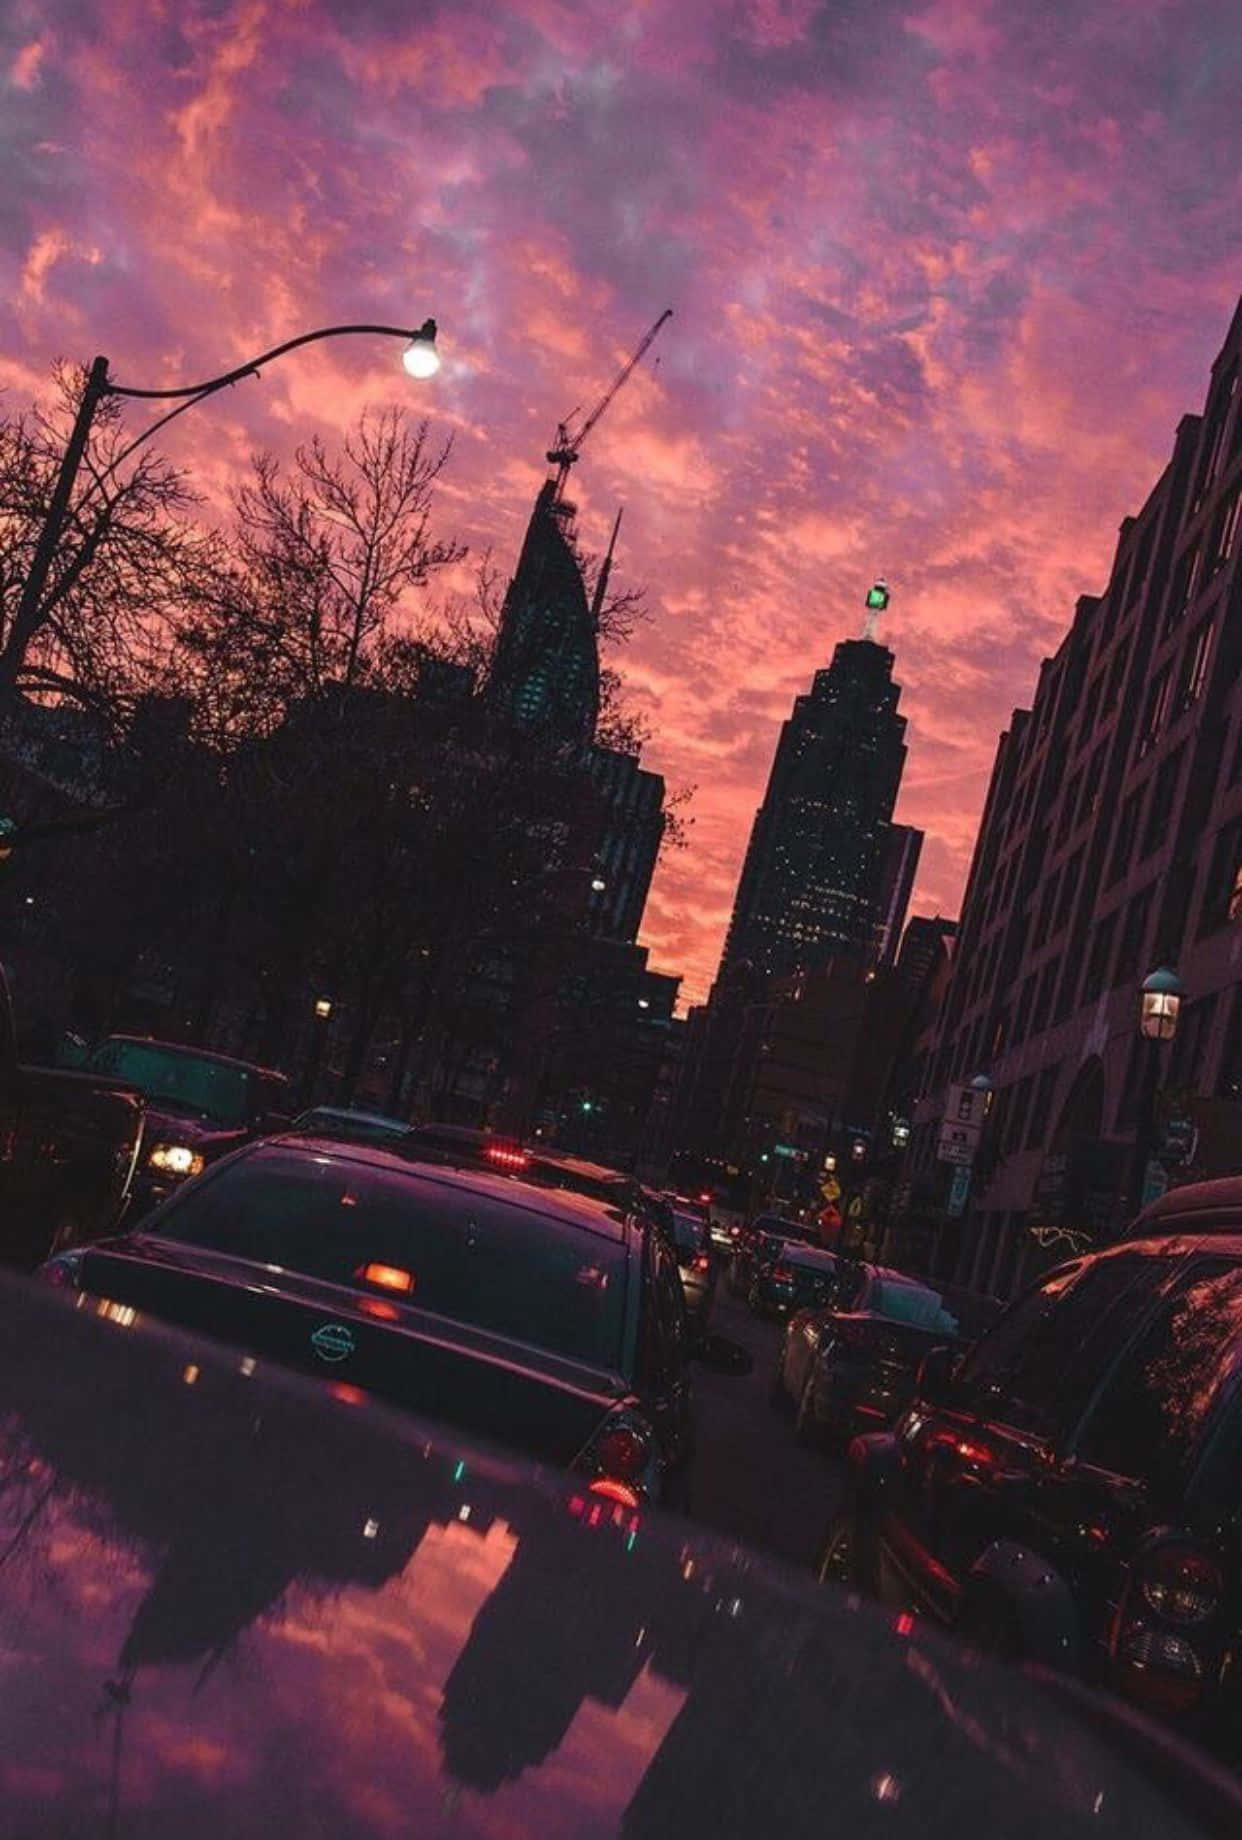 The beauty of a sunset skyline with a rose gold iPhone capturing the moment. Wallpaper